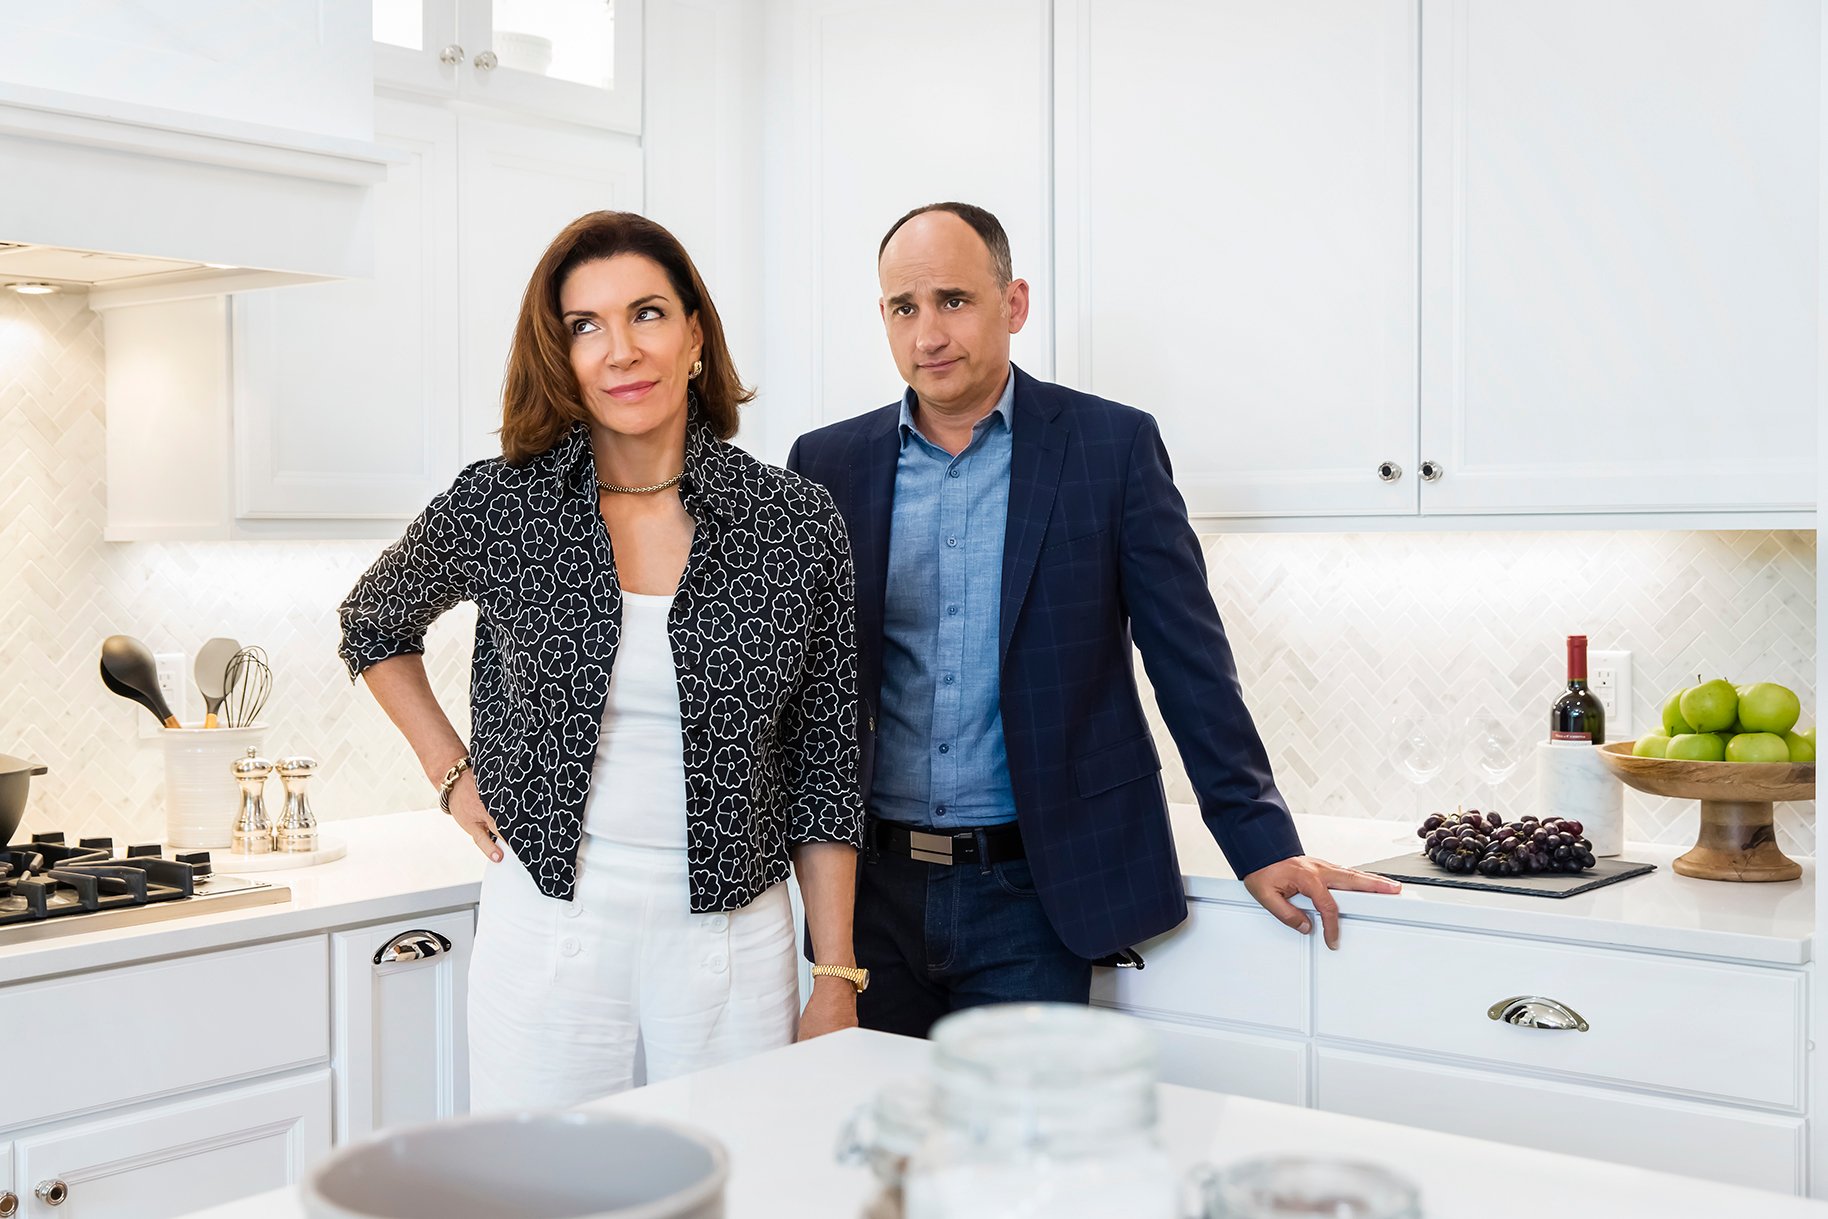 Hilary Farr Shares More Details About Her ‘Love It Or List It’ Renovation